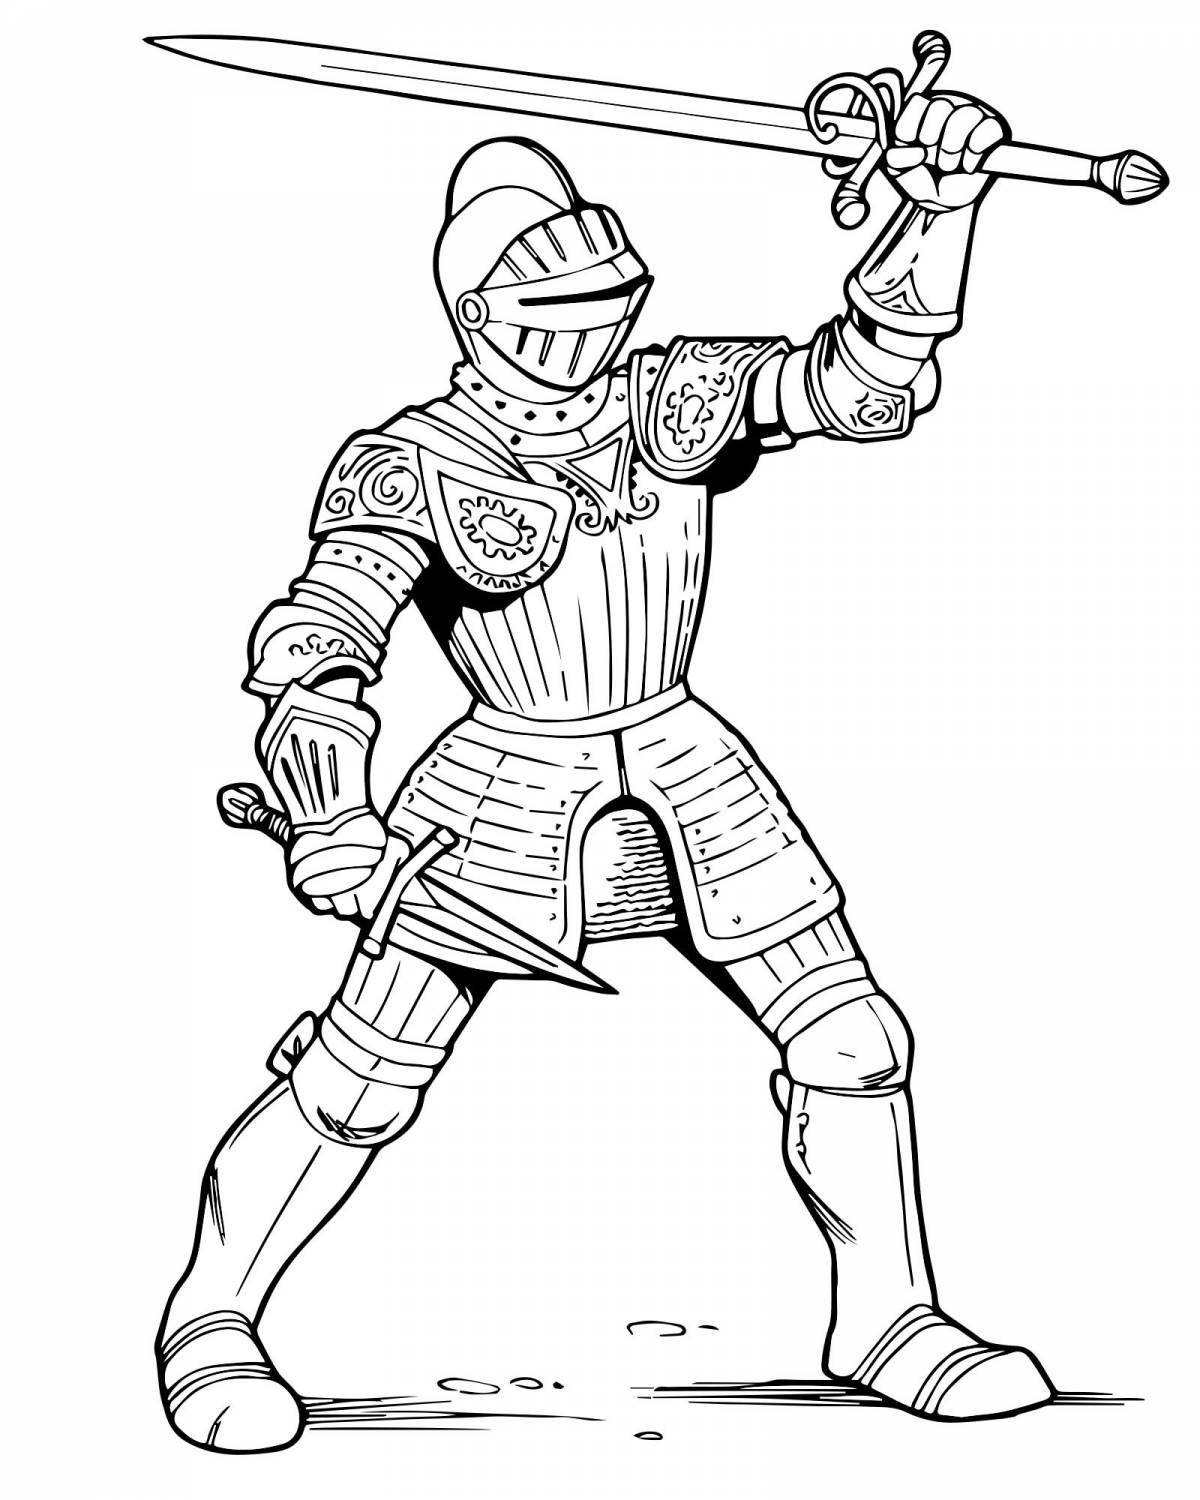 Glorious knight coloring book